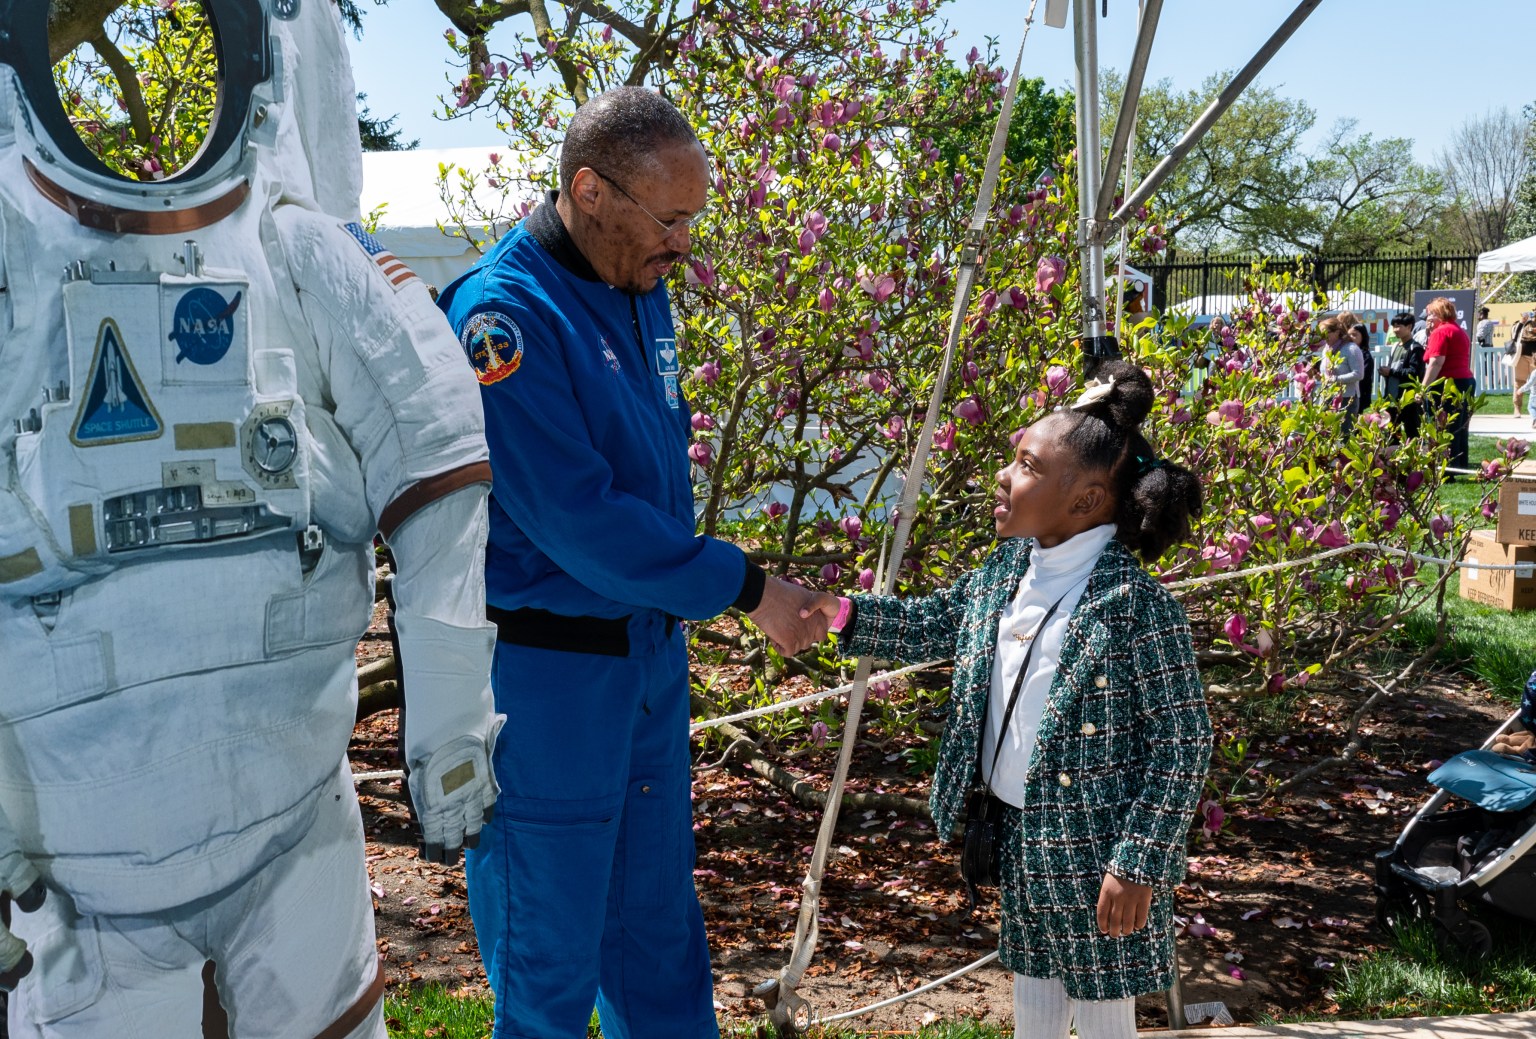 NASA astronaut Alvin Drew shakes a hands with a guest during the White House Easter Egg Roll, Monday, April 10, 2023, on the South Lawn of the White House in Washington.